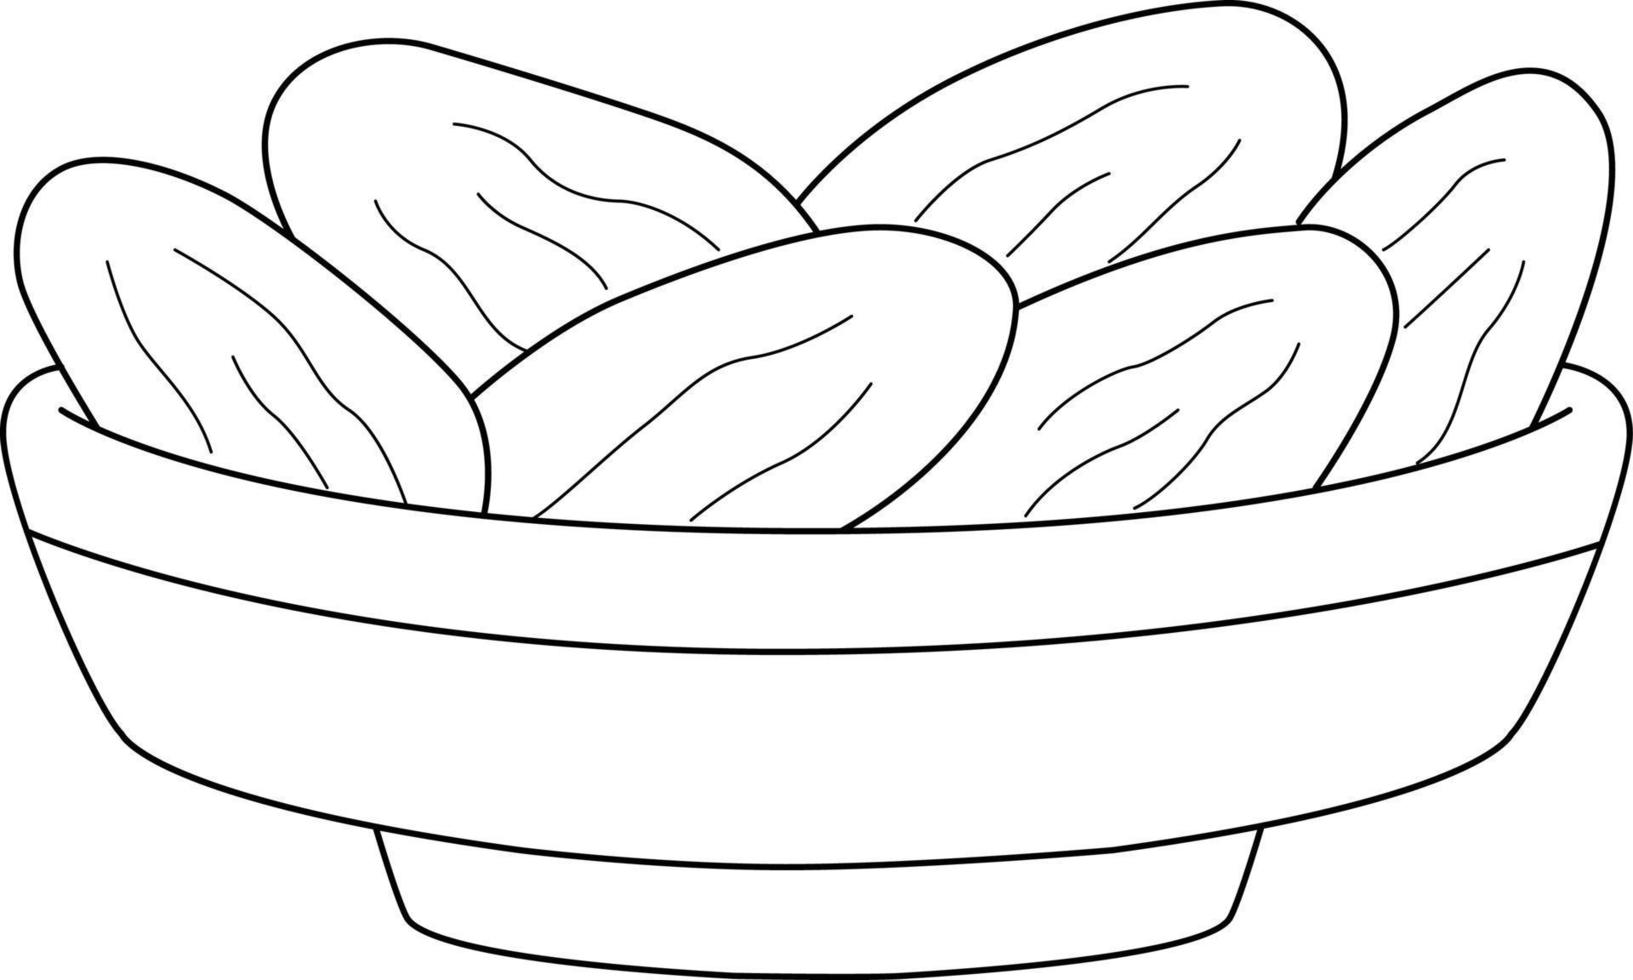 Ramadan Dried Date Isolated Coloring Page for Kids vector